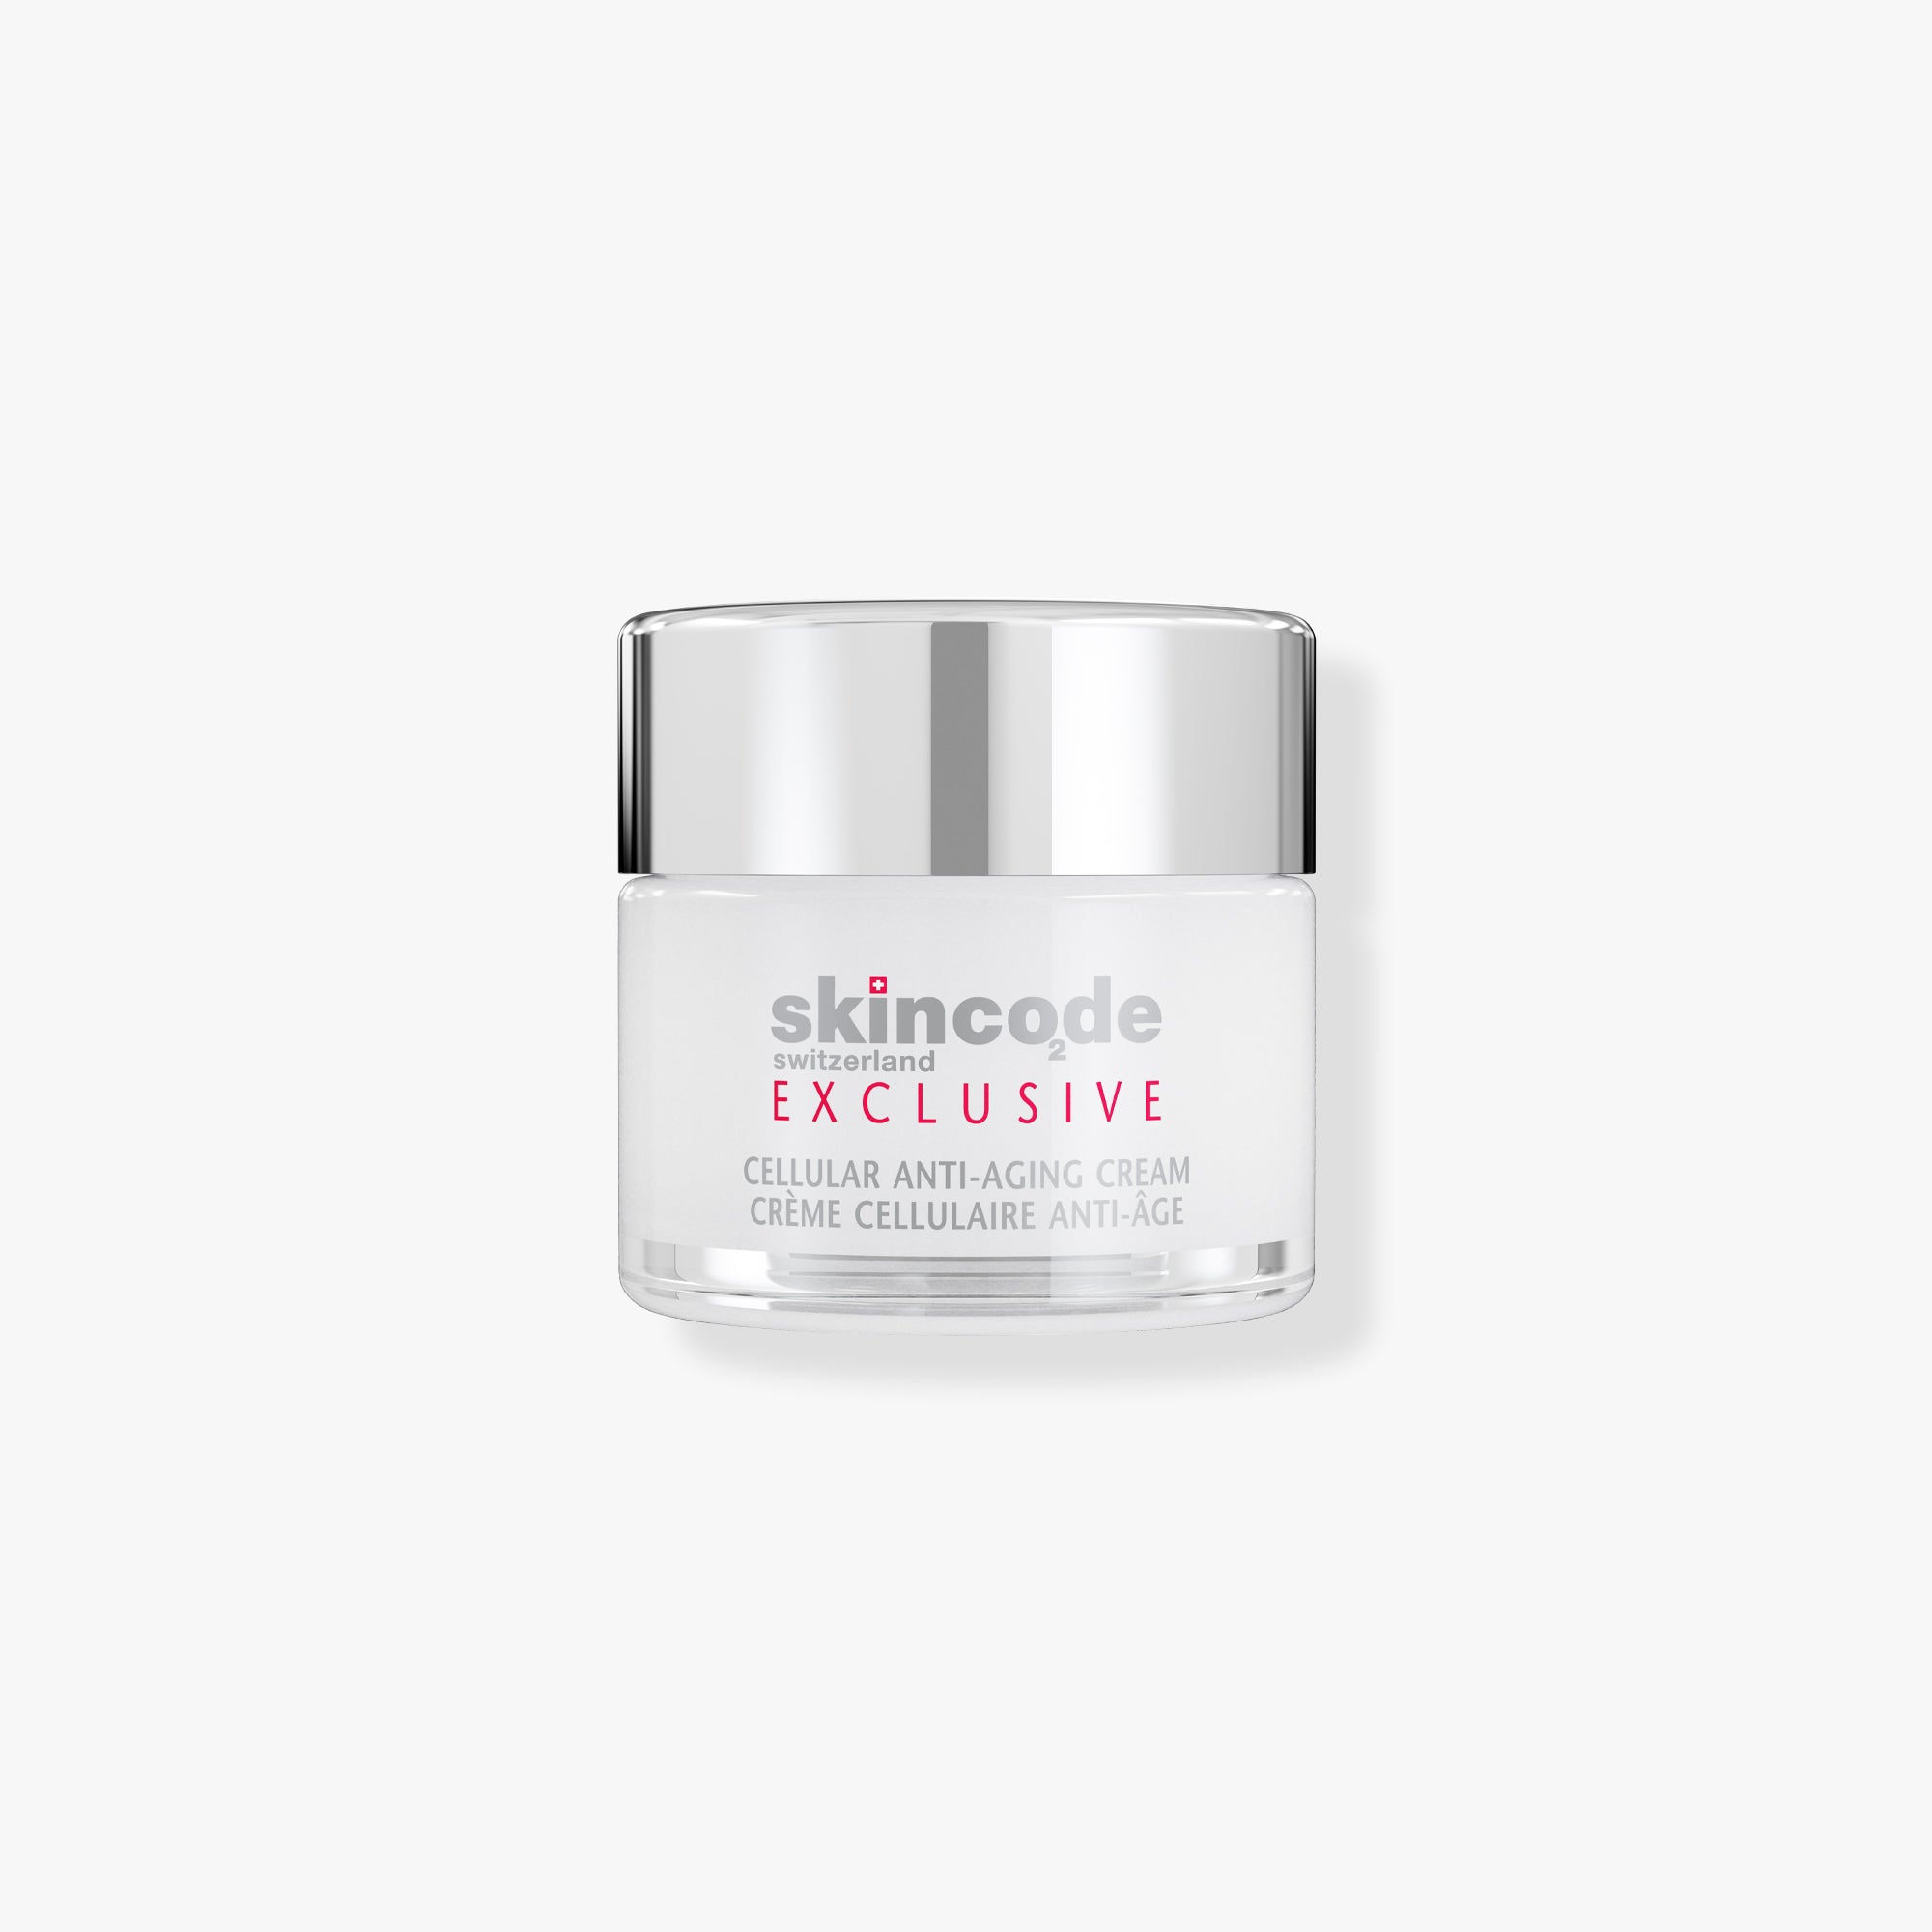 SkinCode Exclusive, Swiss Skincare Jewels Anti-Aging Collection